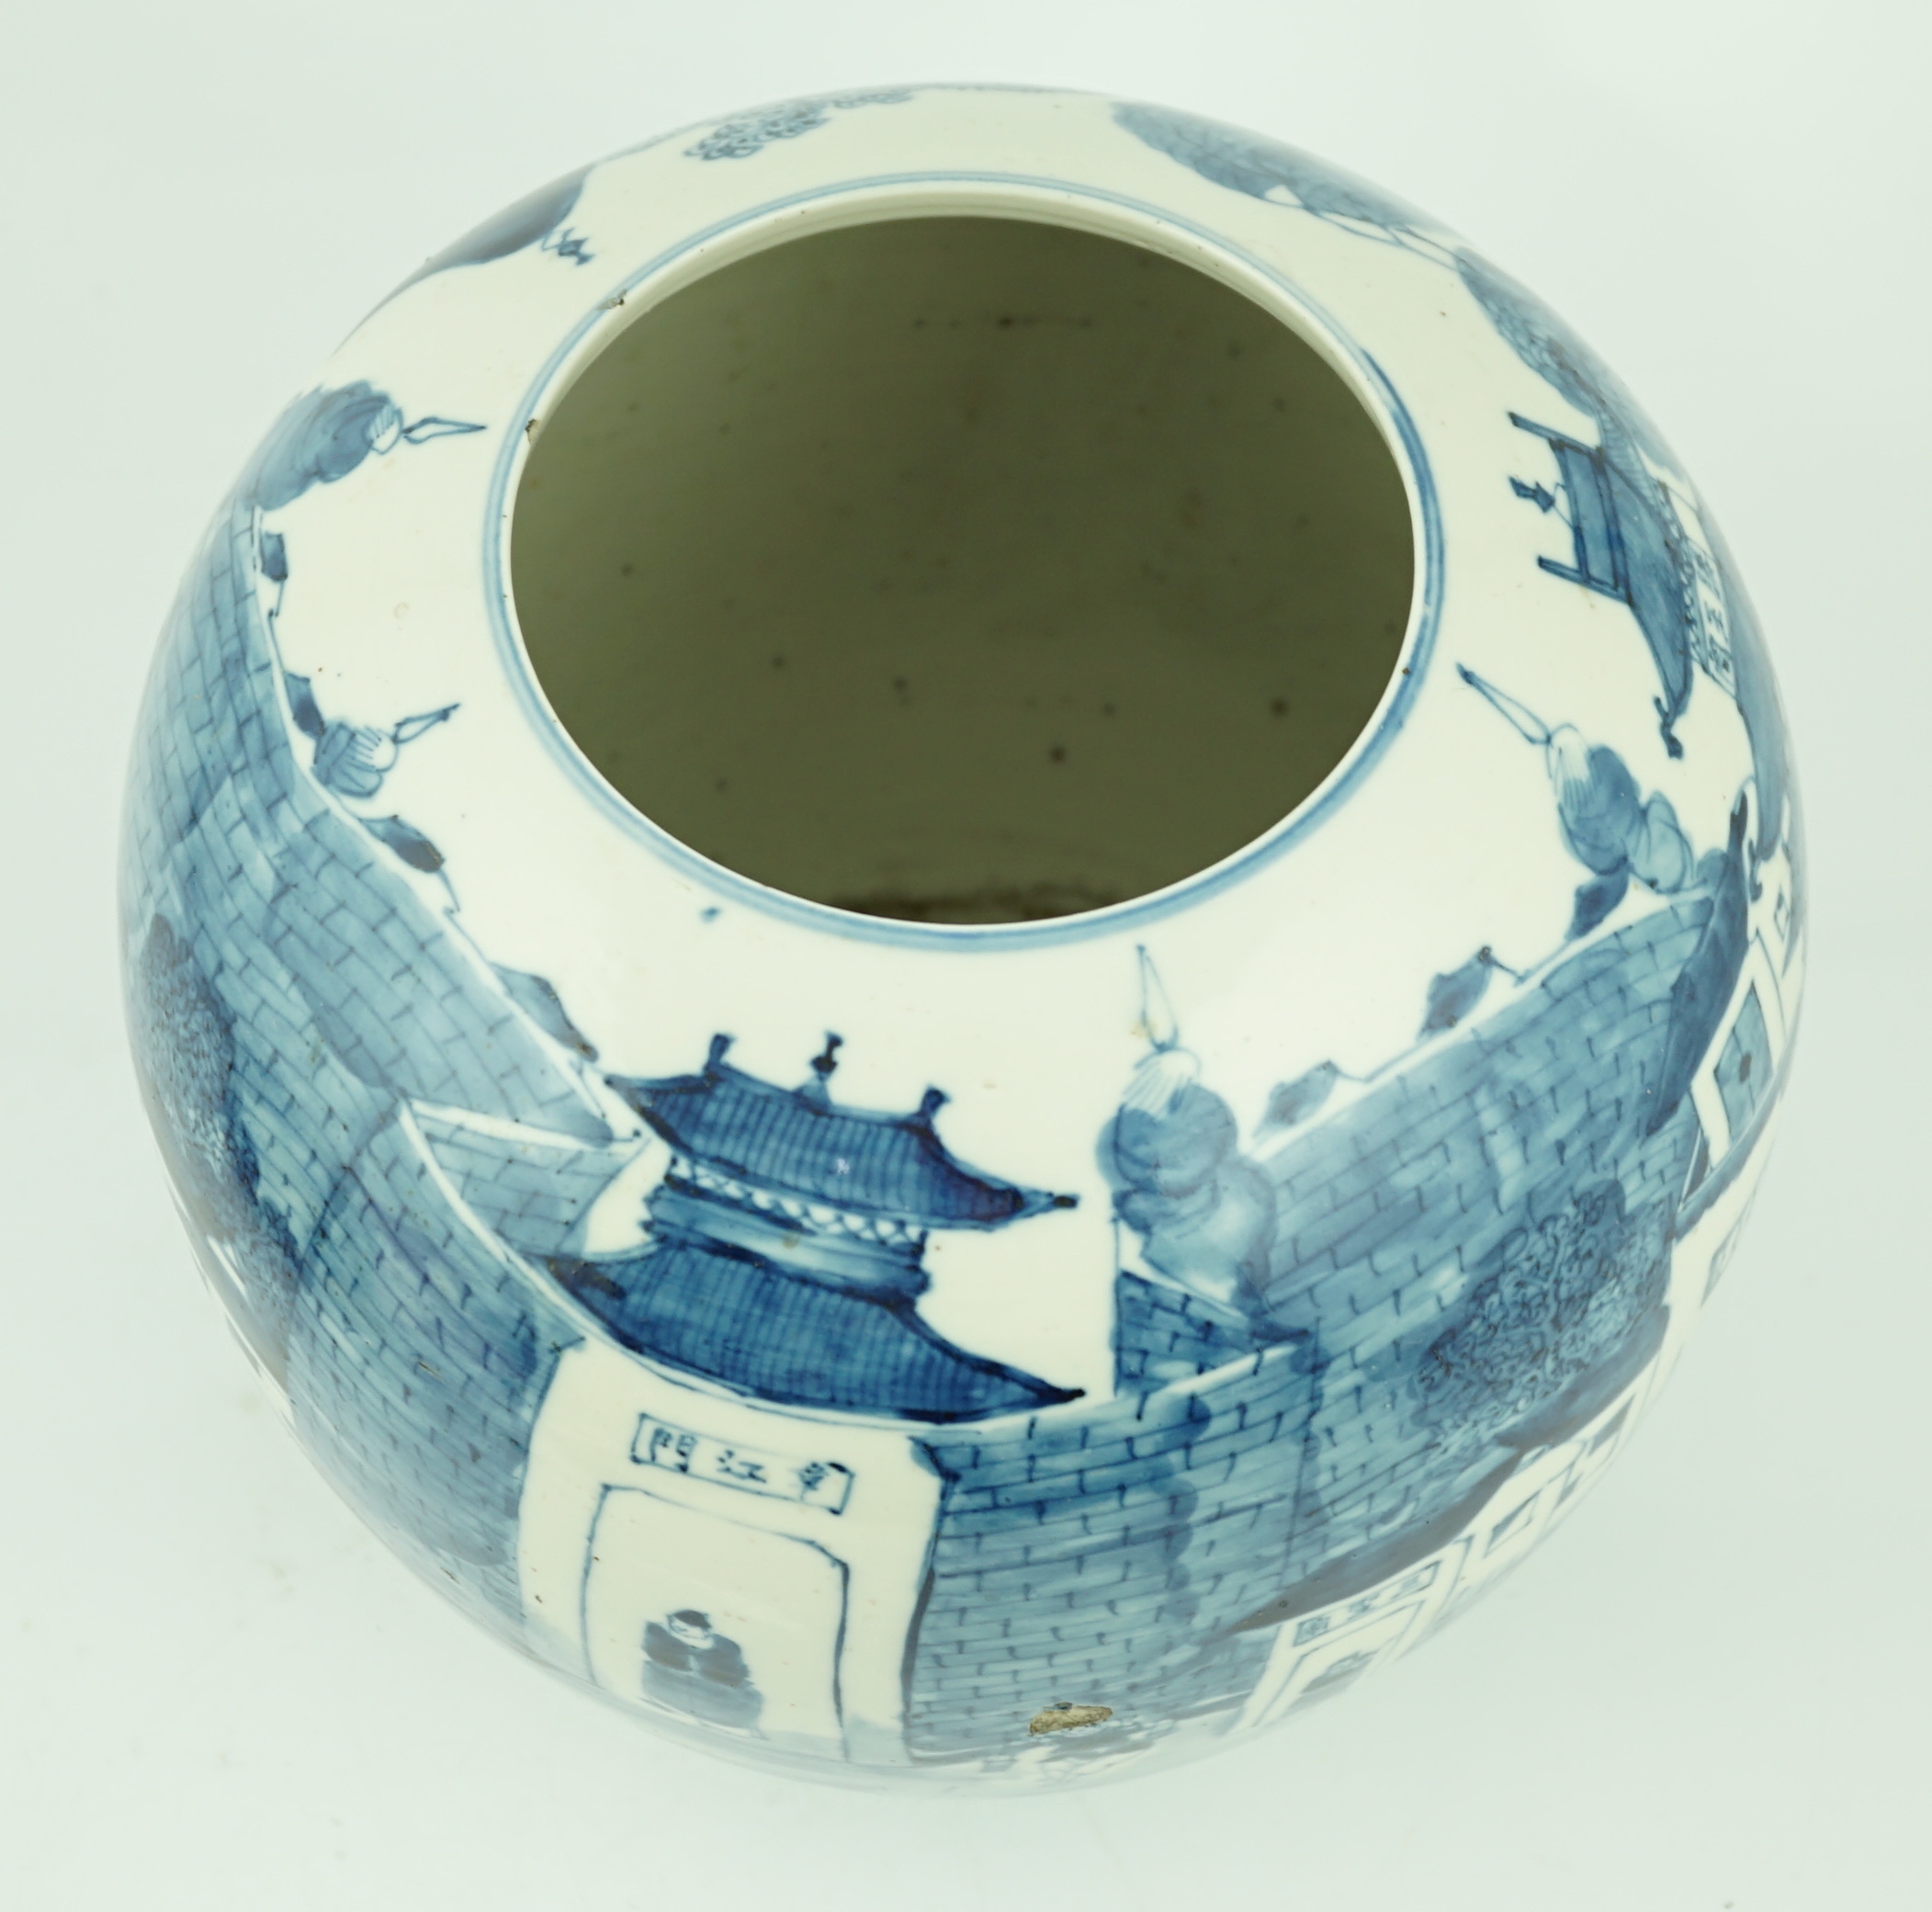 An unusual Chinese blue and white globe-shaped vase, late 19th century